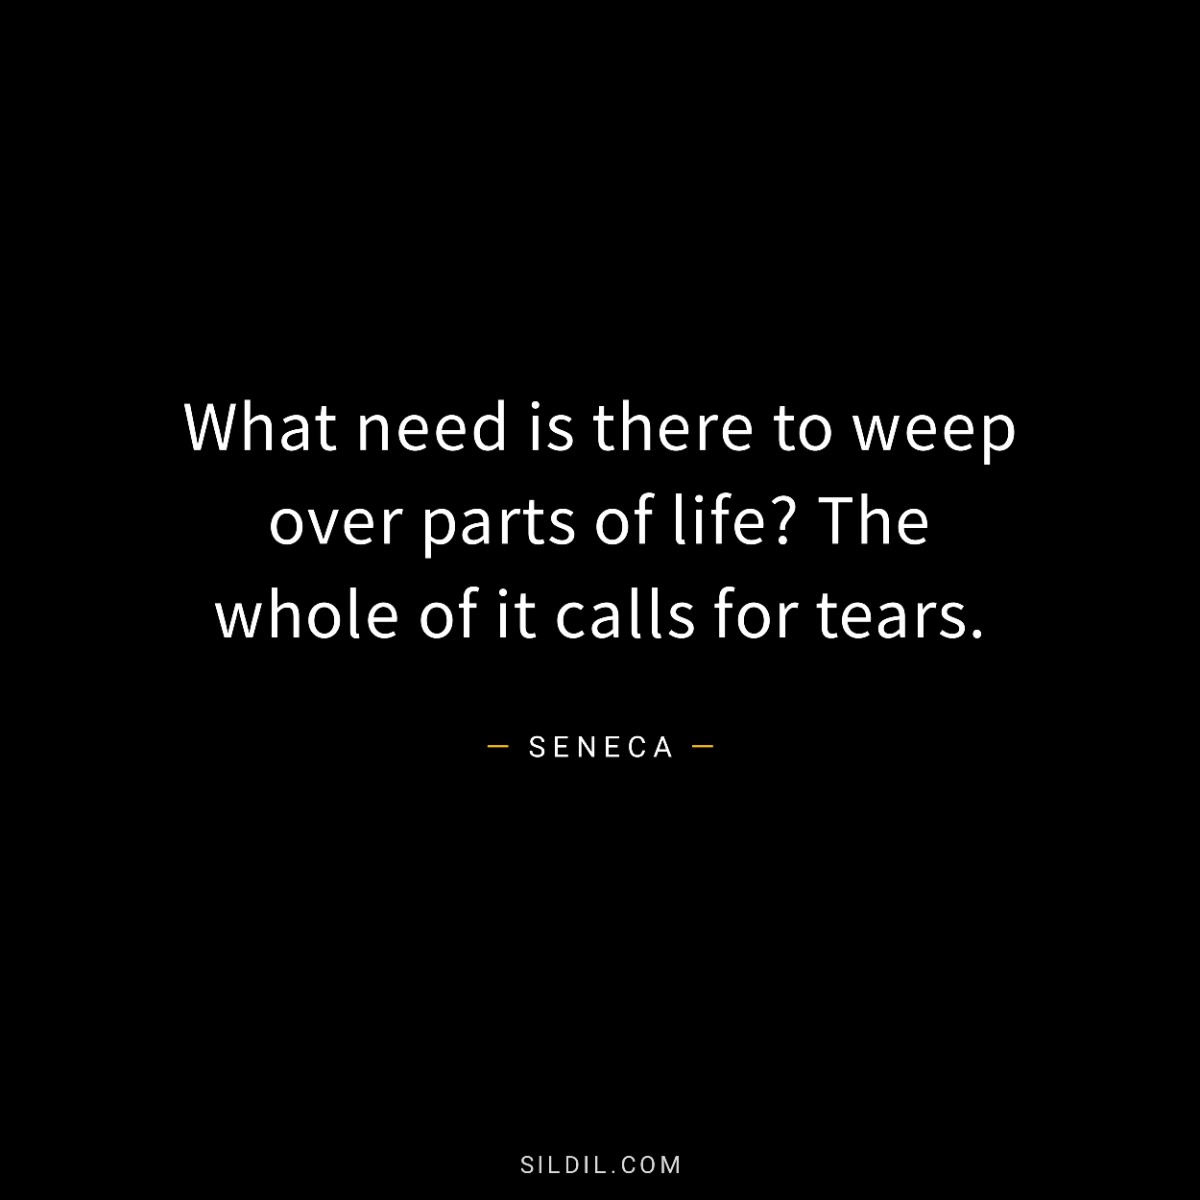 What need is there to weep over parts of life? The whole of it calls for tears.